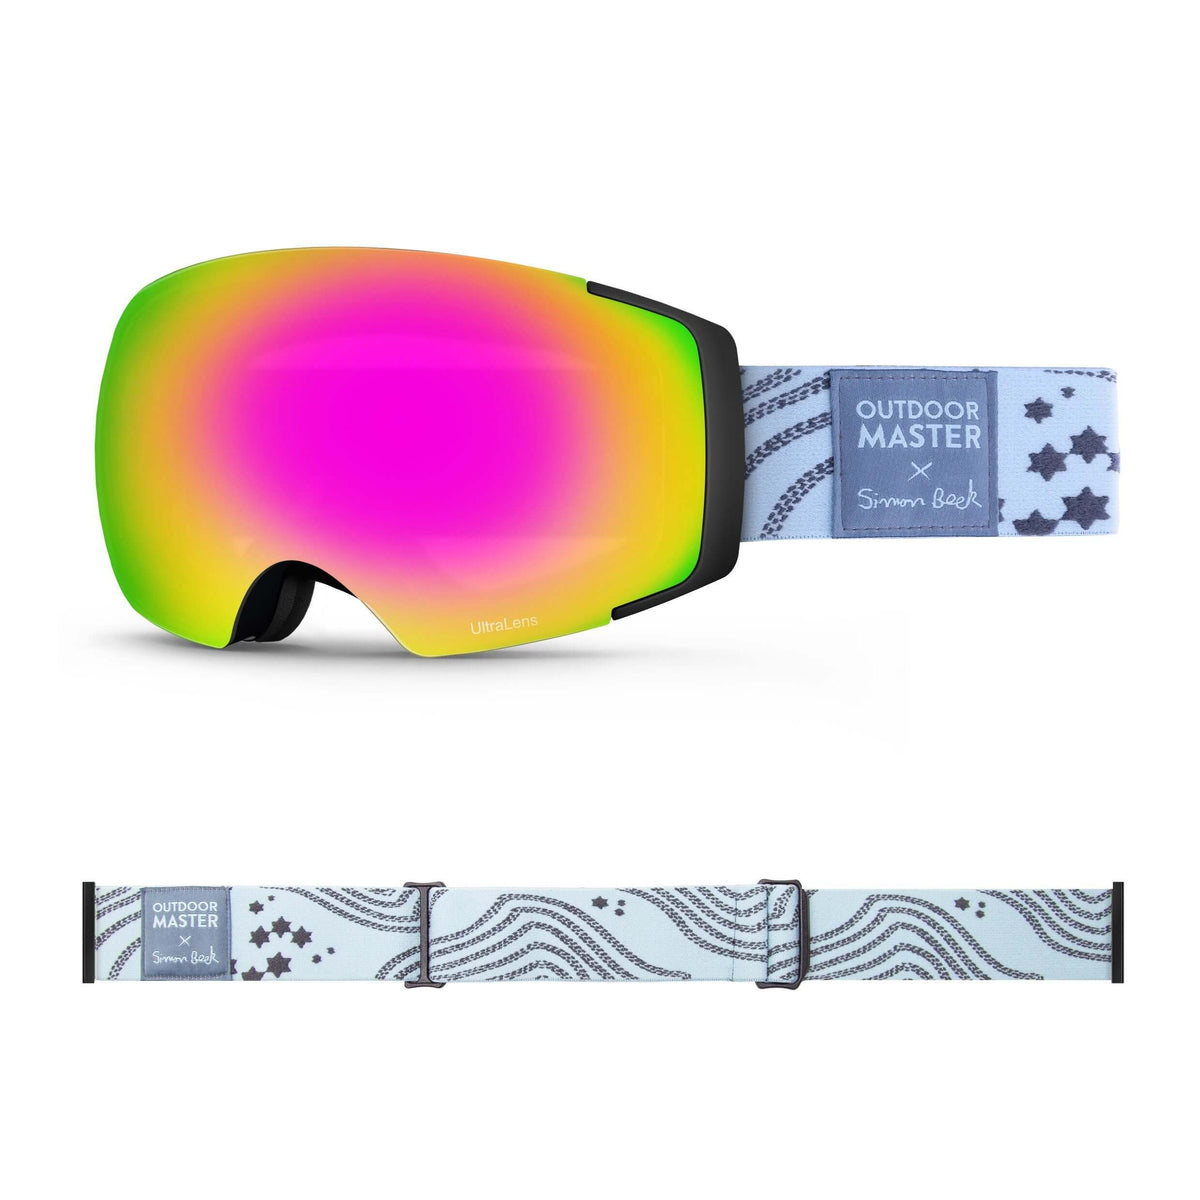 OutdoorMaster x Simon Beck Ski Goggles Pro Series - Snowshoeing Art Limited Edition OutdoorMaster UltraLens VLT 22% Optimized Orange with REVO Pink Star Road-Lightsteelblue